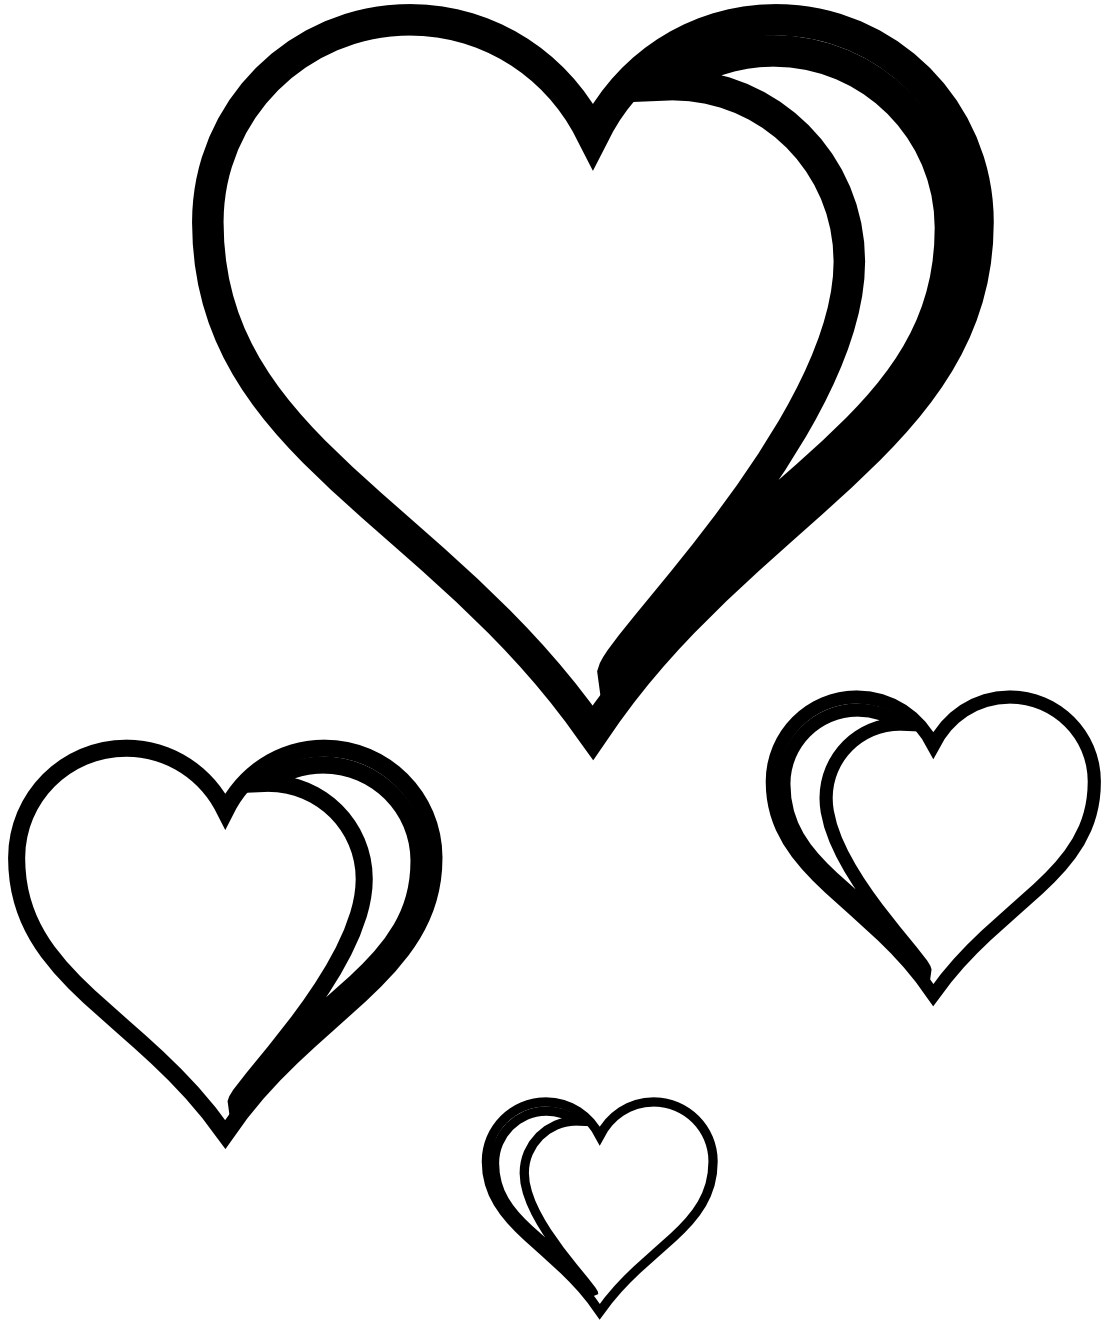 Heart  black and white clipart heart black and white free images 4